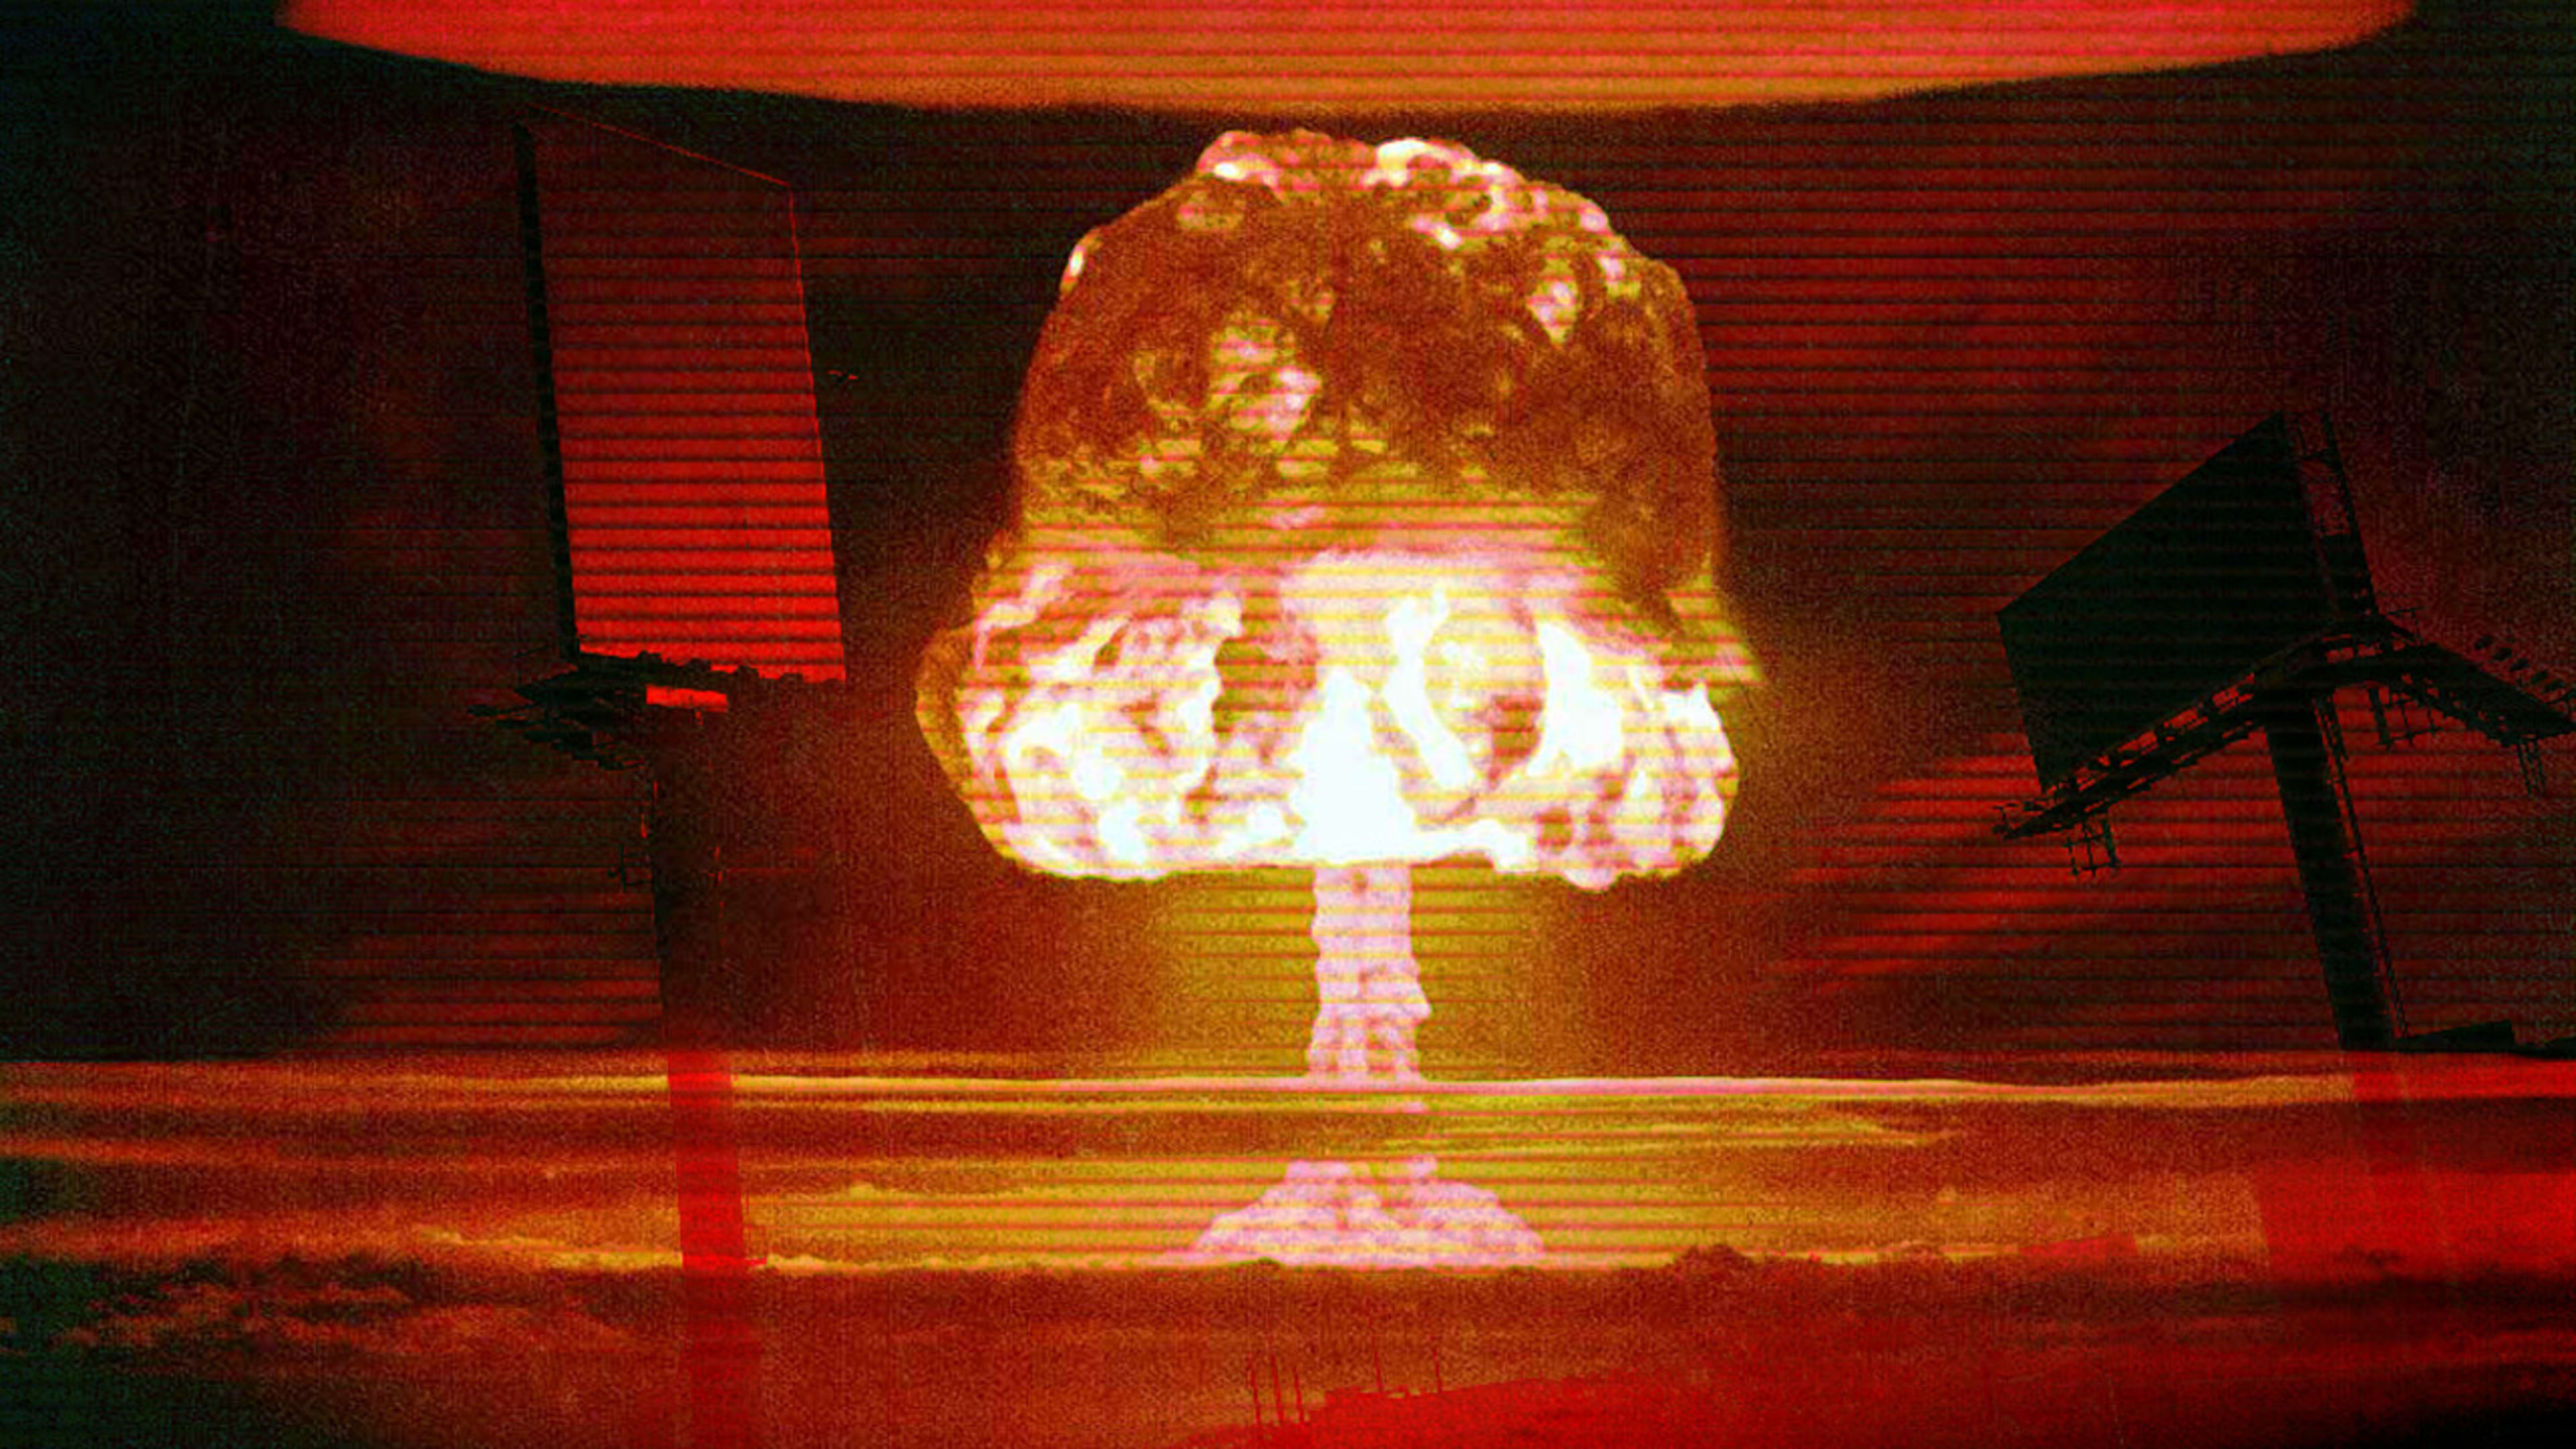 Google And Yahoo’s Feud With Ad-Blocking Company Goes “Nuclear”